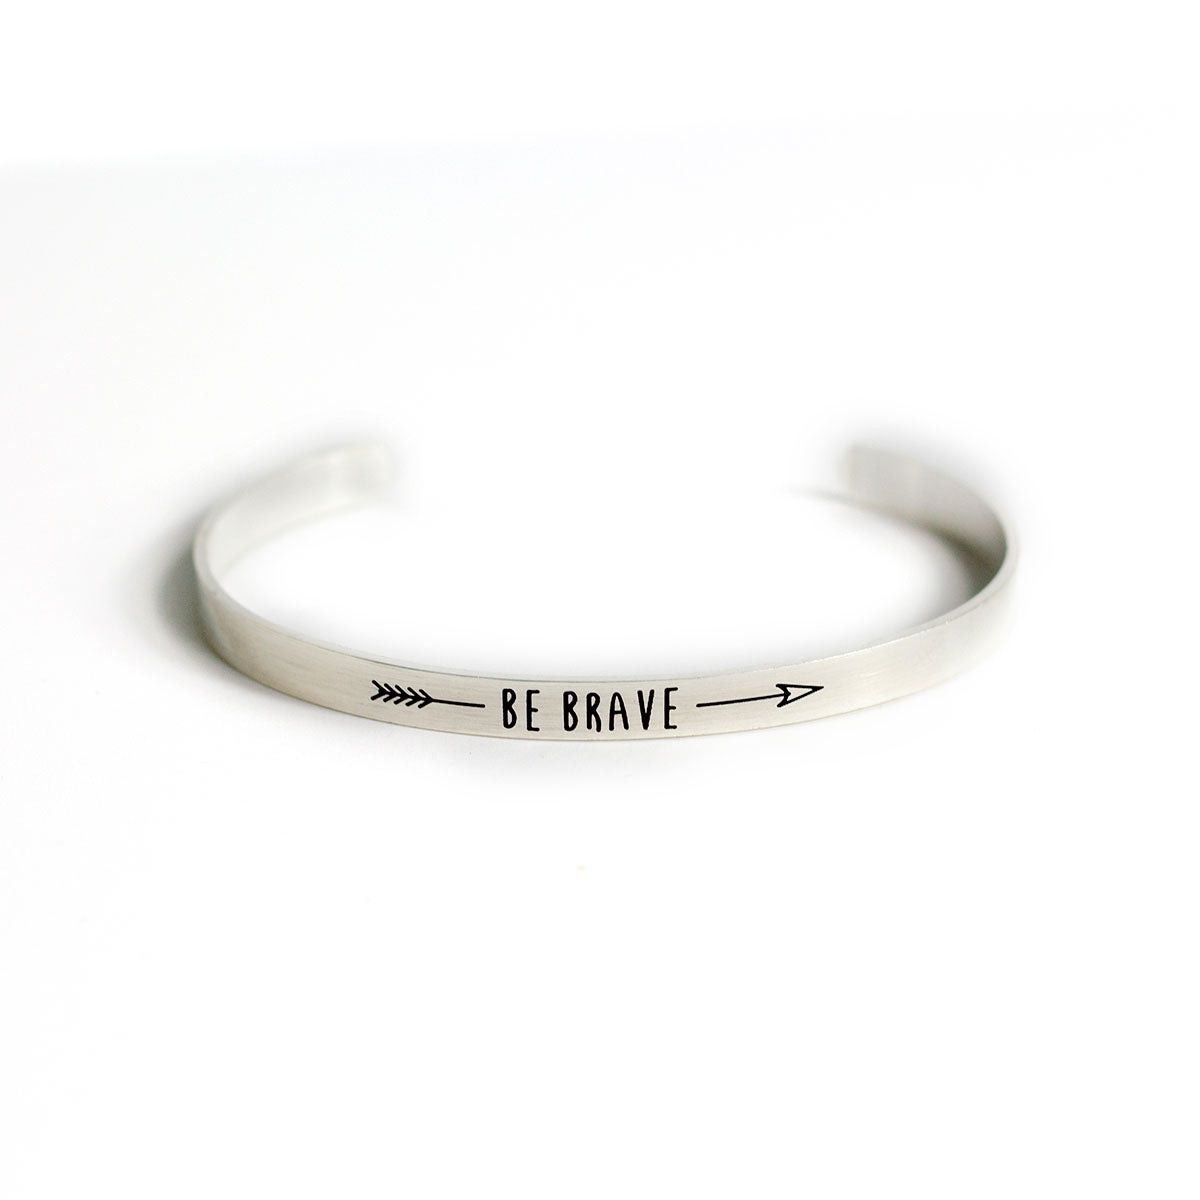 Be Brave Adjustable Bracelet Cuff - Silver Gold, Jewelry, HEED THE HUM